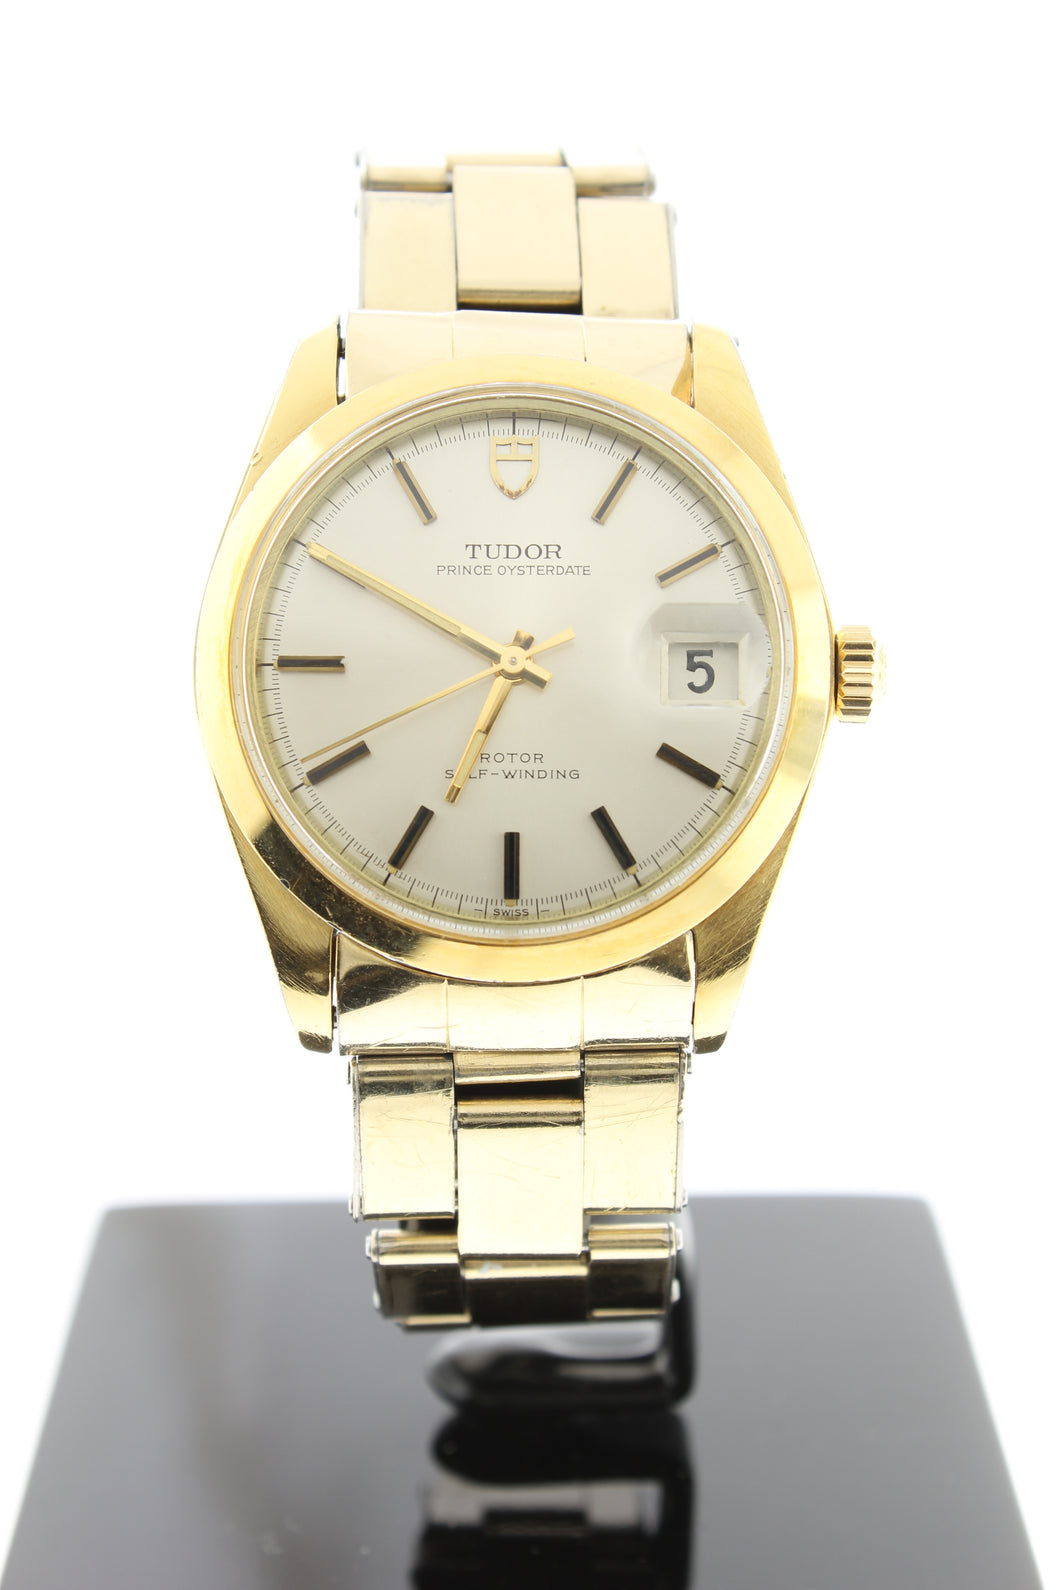 Tudor Rolex Prince Oysterdate Gold PVD Automatic Champagne 9071 34mm - Arnik Jewellers